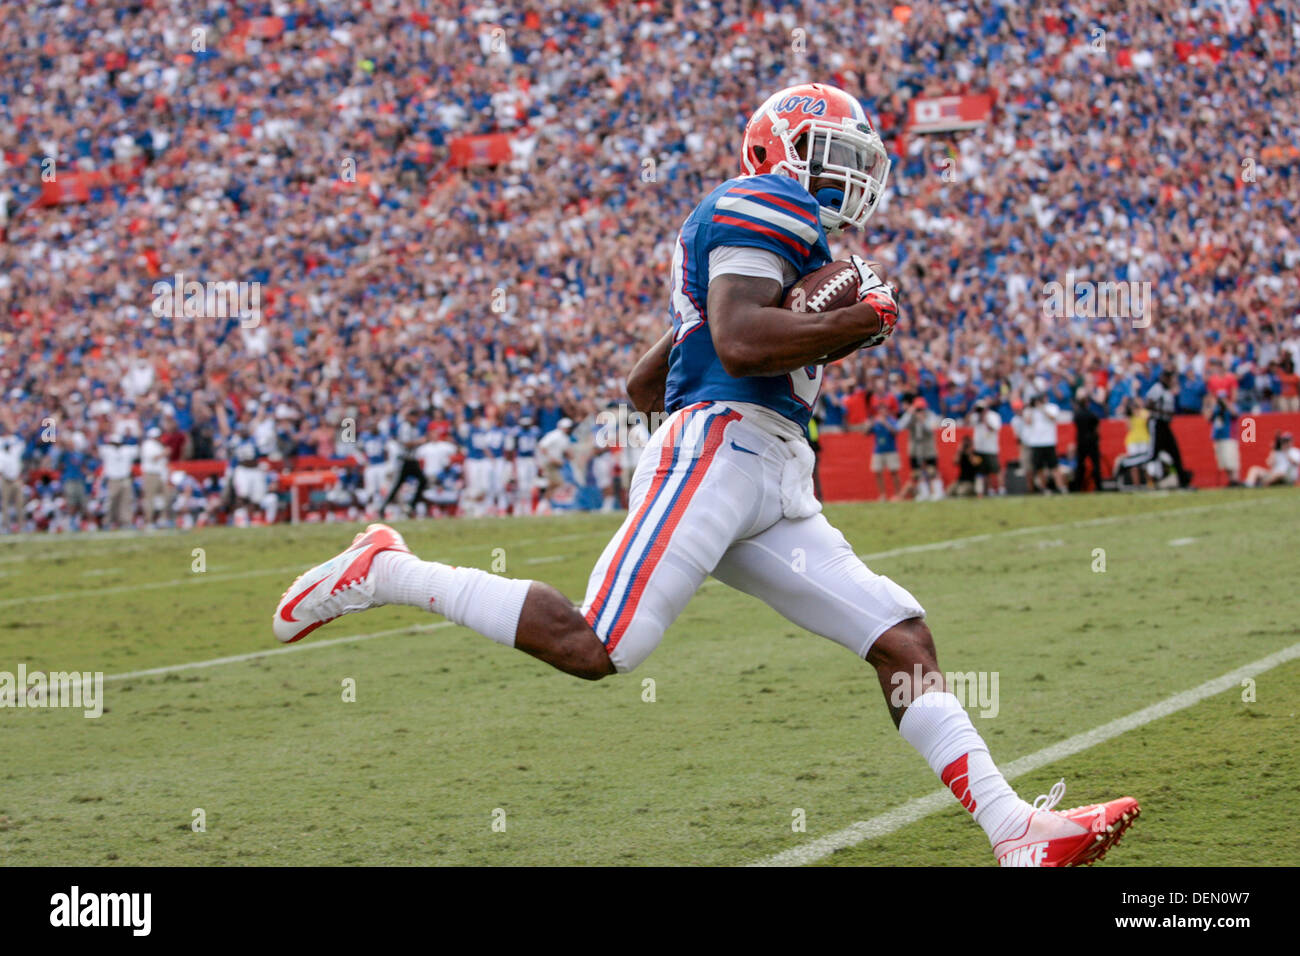 Gainesville, Florida, USA. 21st Sep, 2013. WILL VRAGOVIC | Times.Florida Gators wide receiver Solomon Patton (83) crosses the goal line for a second quarter touchdown during the Florida Gators against the Tennessee Volunteers at Ben Hill Griffin Stadium in Gainesville, Fla. on Saturday, Sept. 21, 2013. Credit:  Will Vragovic/Tampa Bay Times/ZUMAPRESS.com/Alamy Live News Stock Photo